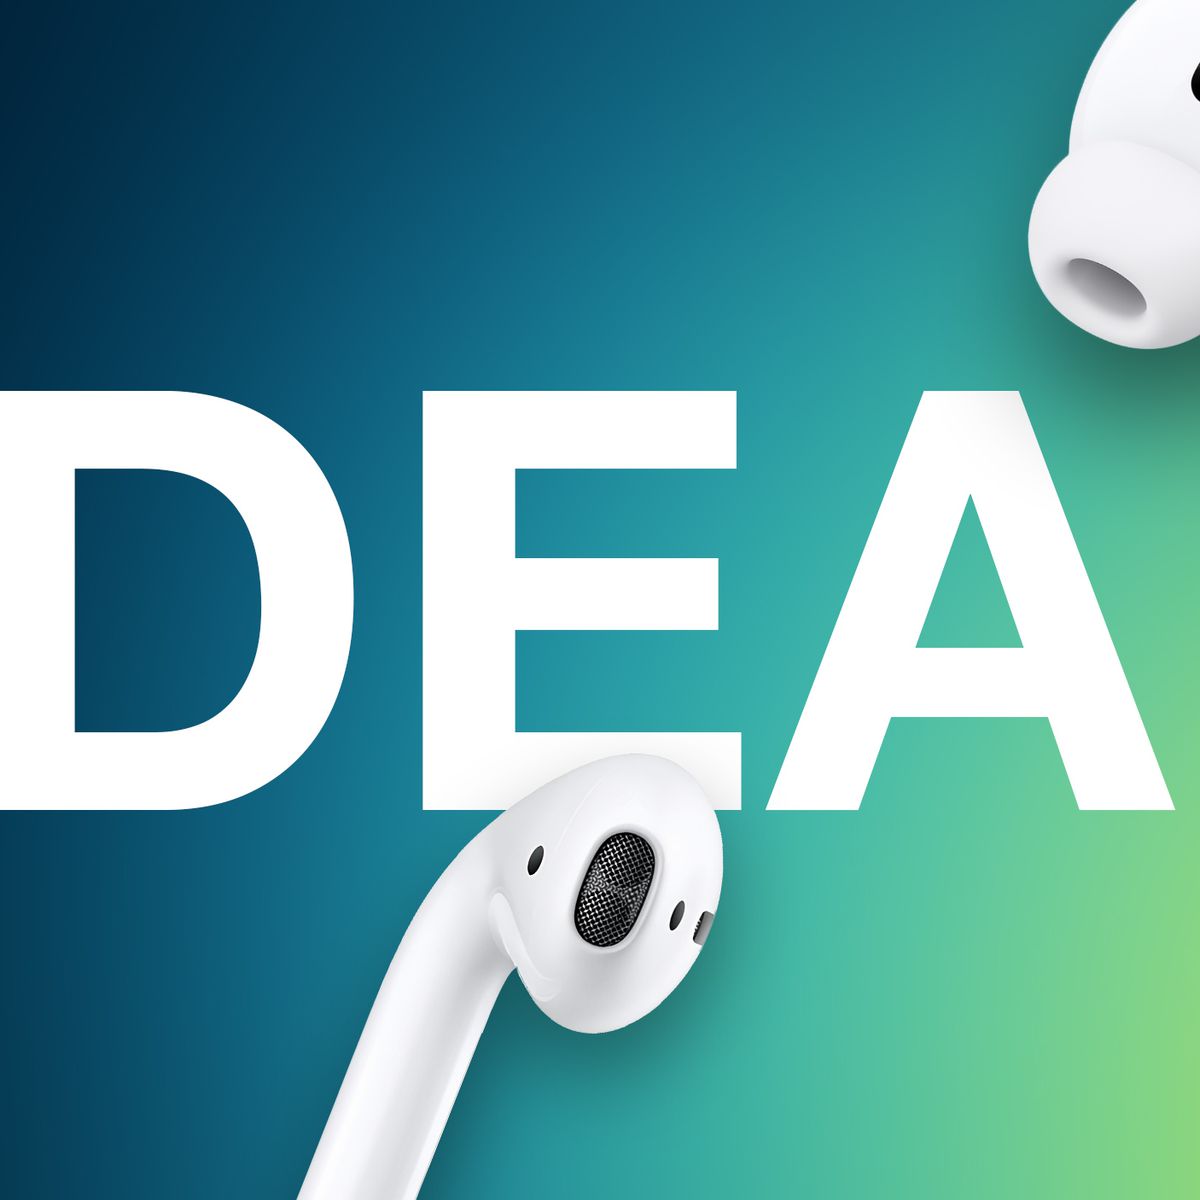 Shop All-Time Low Prices on AirPods Pro 2 With USB-C and AirPods 3 